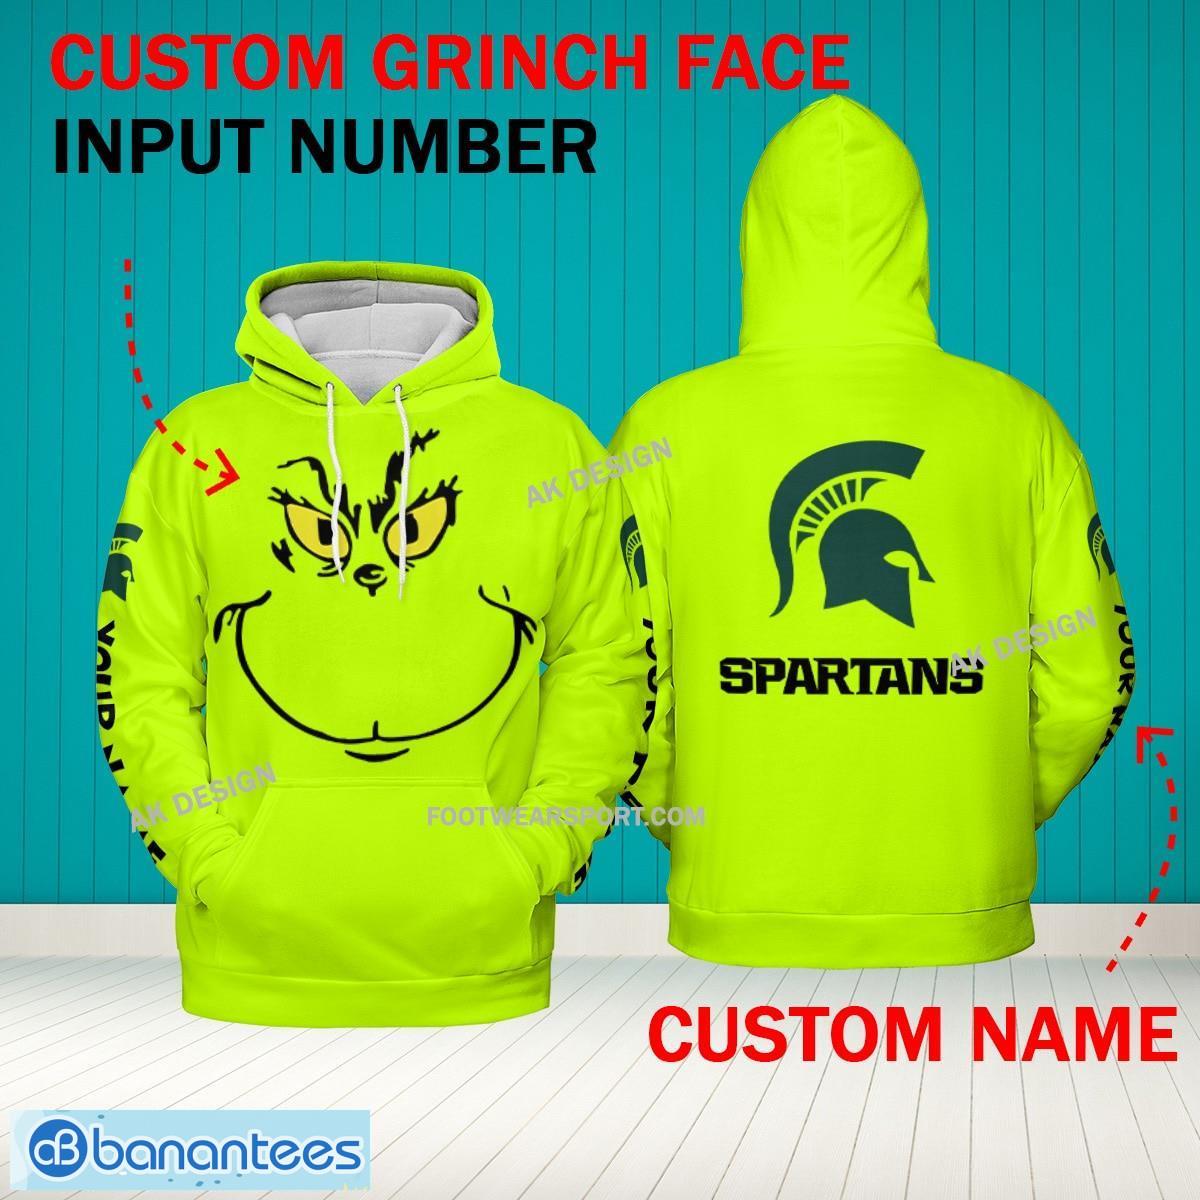 Grinch Face Michigan State Spartans 3D Hoodie, Zip Hoodie, Sweater Green AOP Custom Number And Name - Grinch Face NCAA Michigan State Spartans 3D Hoodie